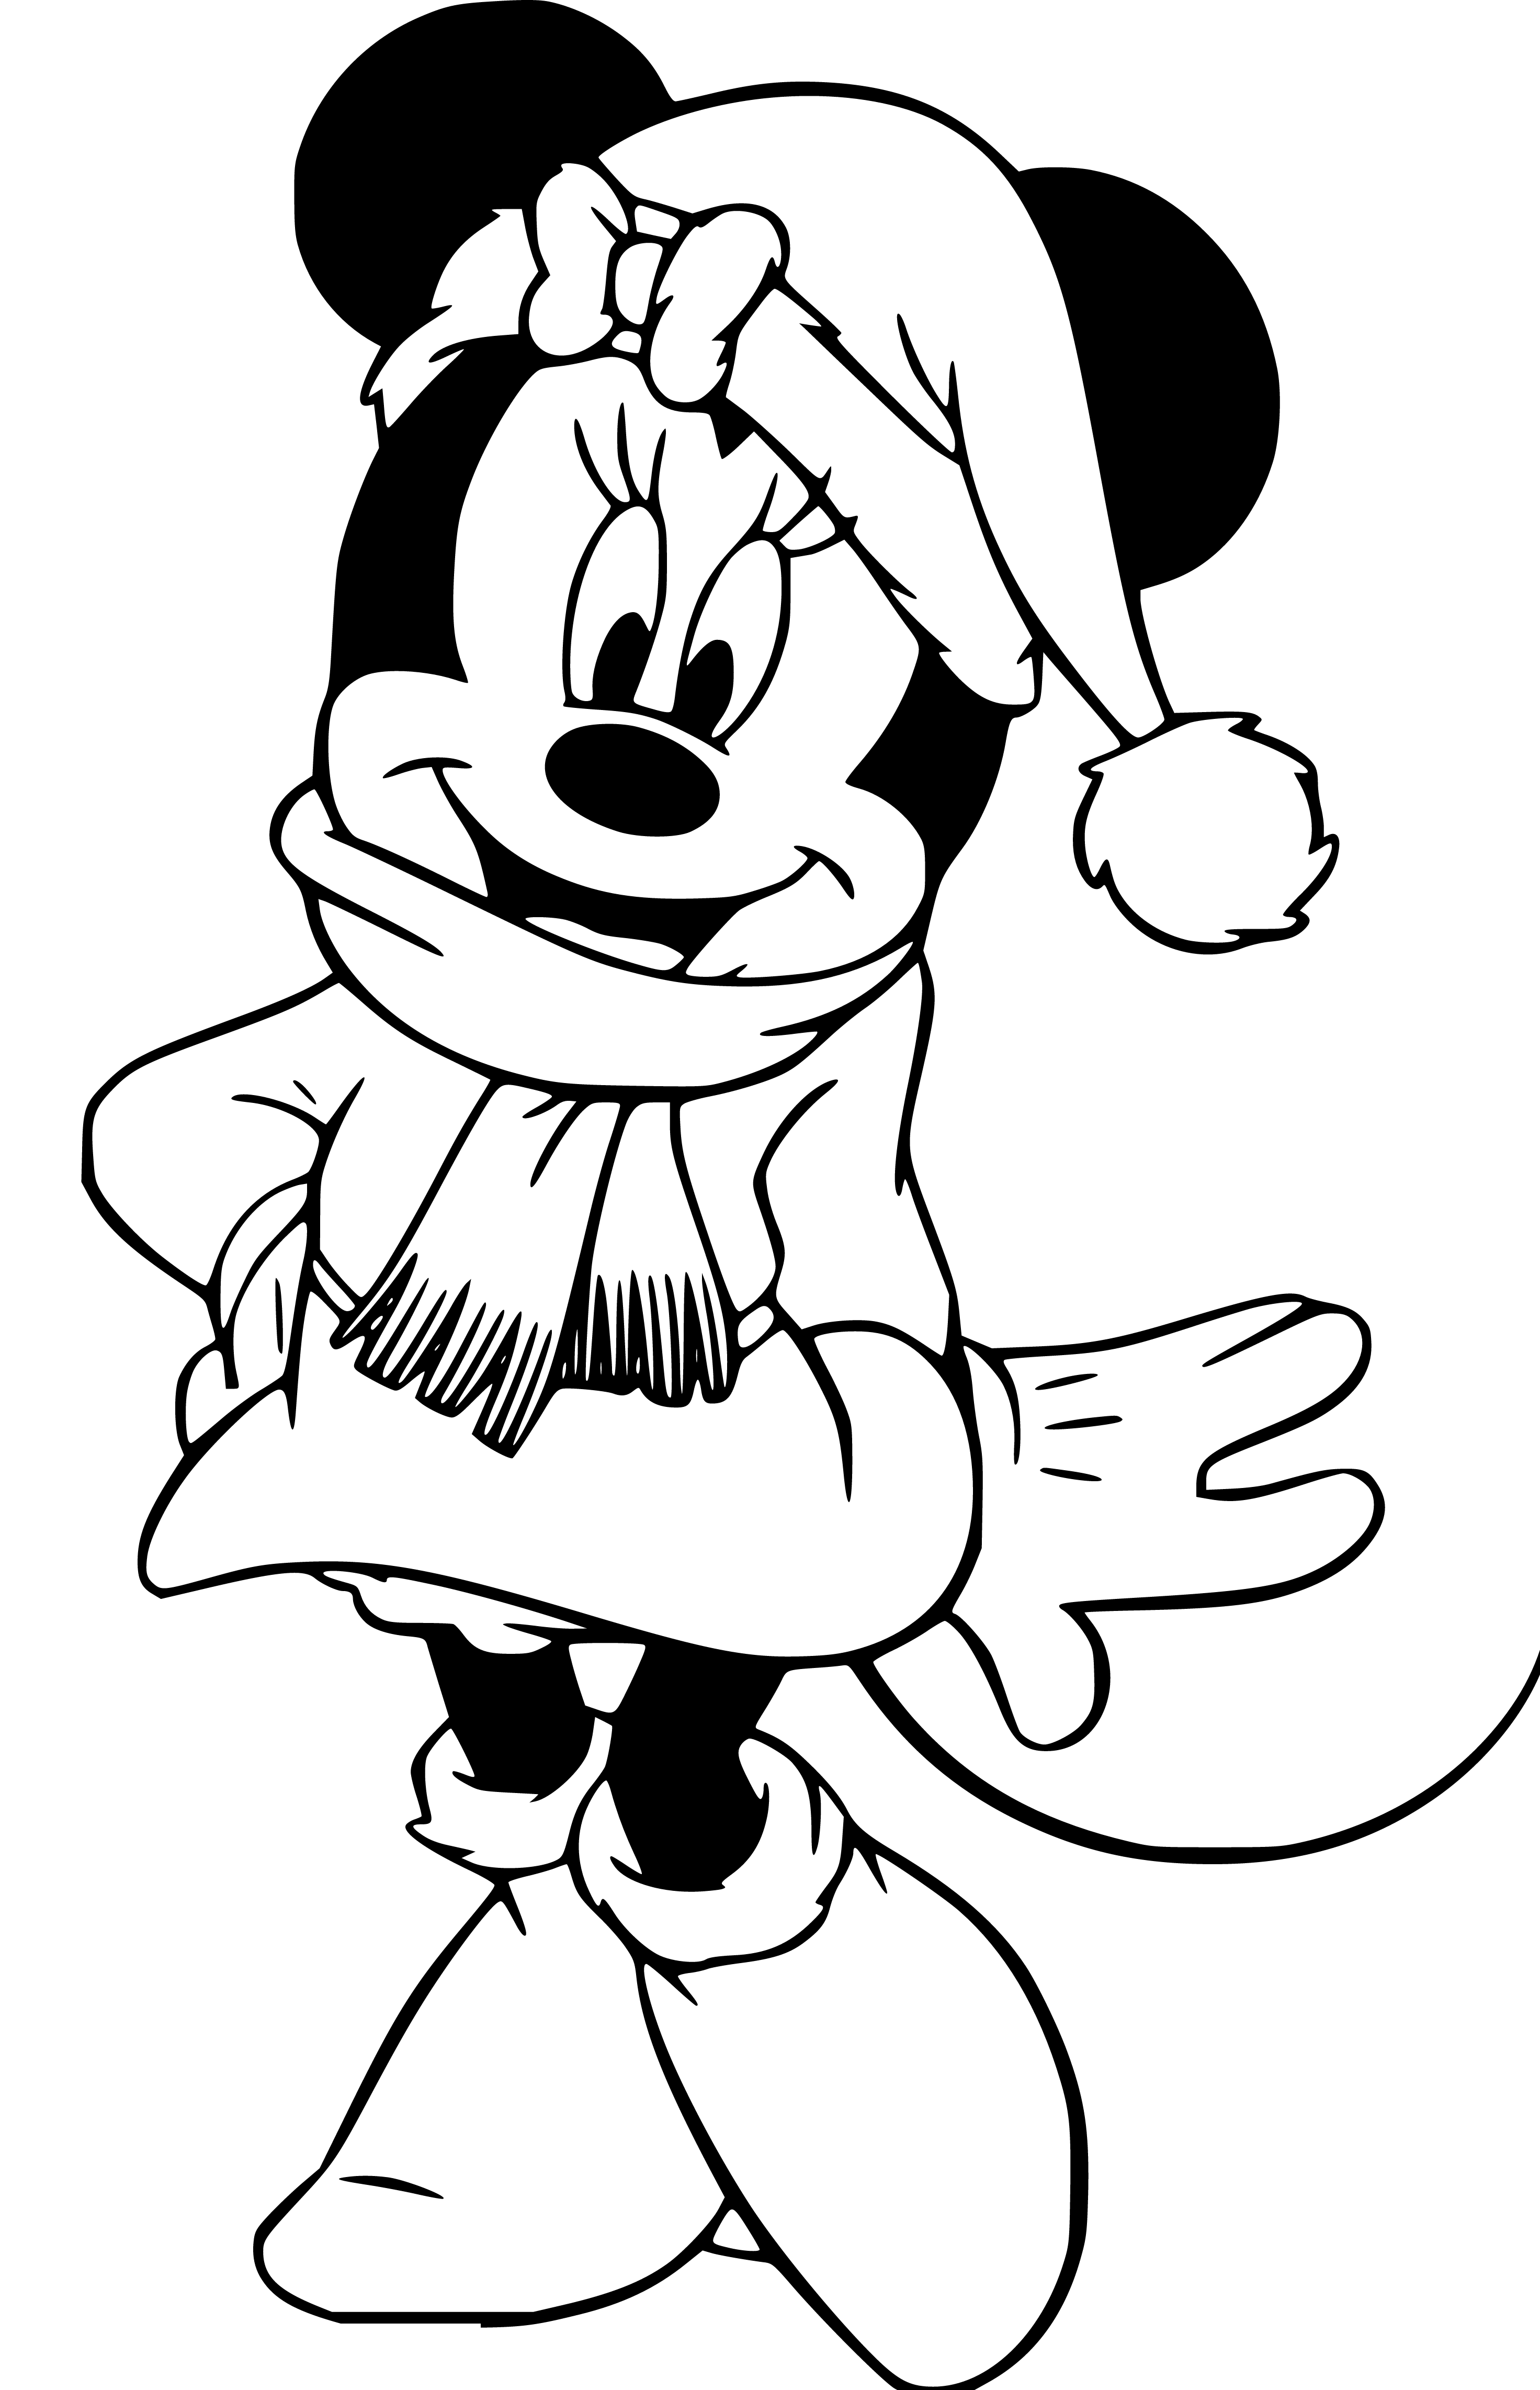 Simple Minnie Mouse to Drawing Coloring Sheet - SheetalColor.com